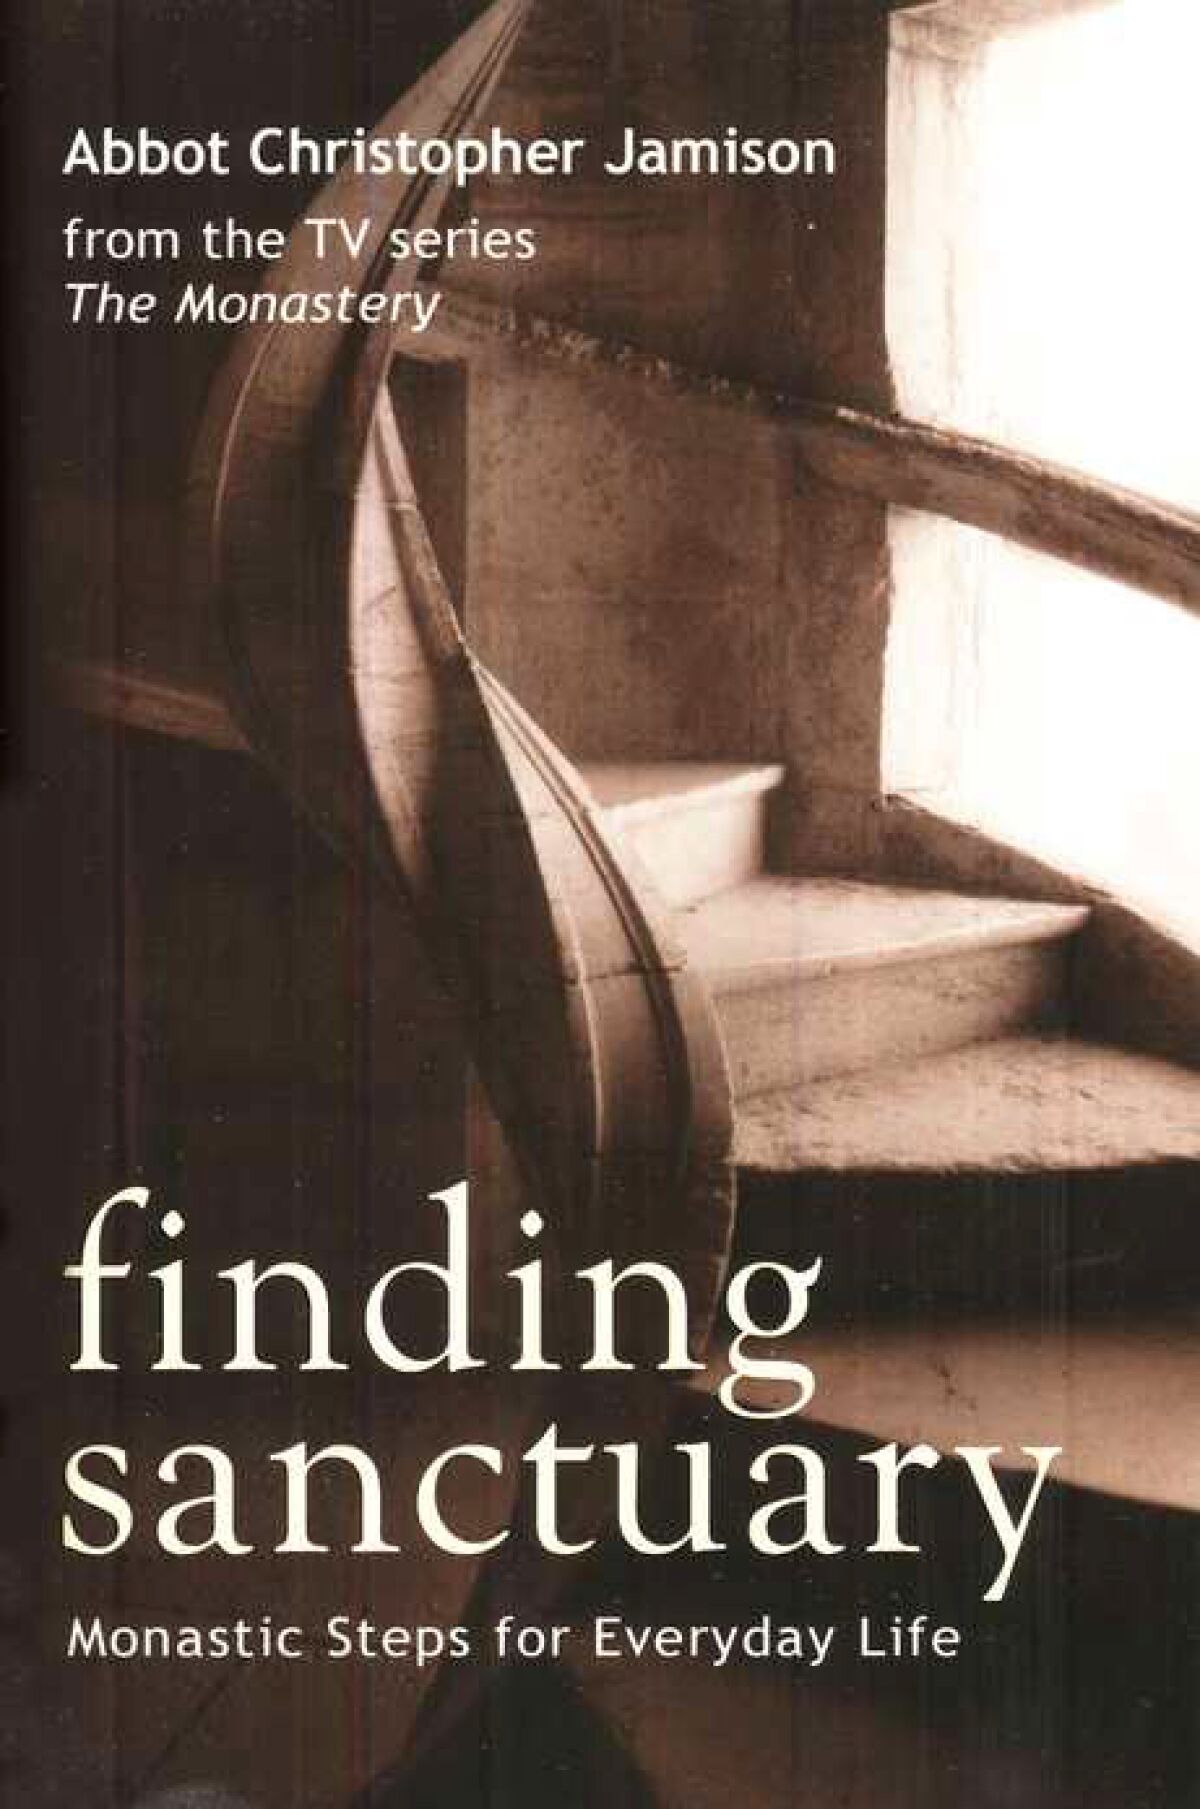 “Finding Sanctuary: Monastic Steps for Everyday Life," by Abbot Christopher Jamison.